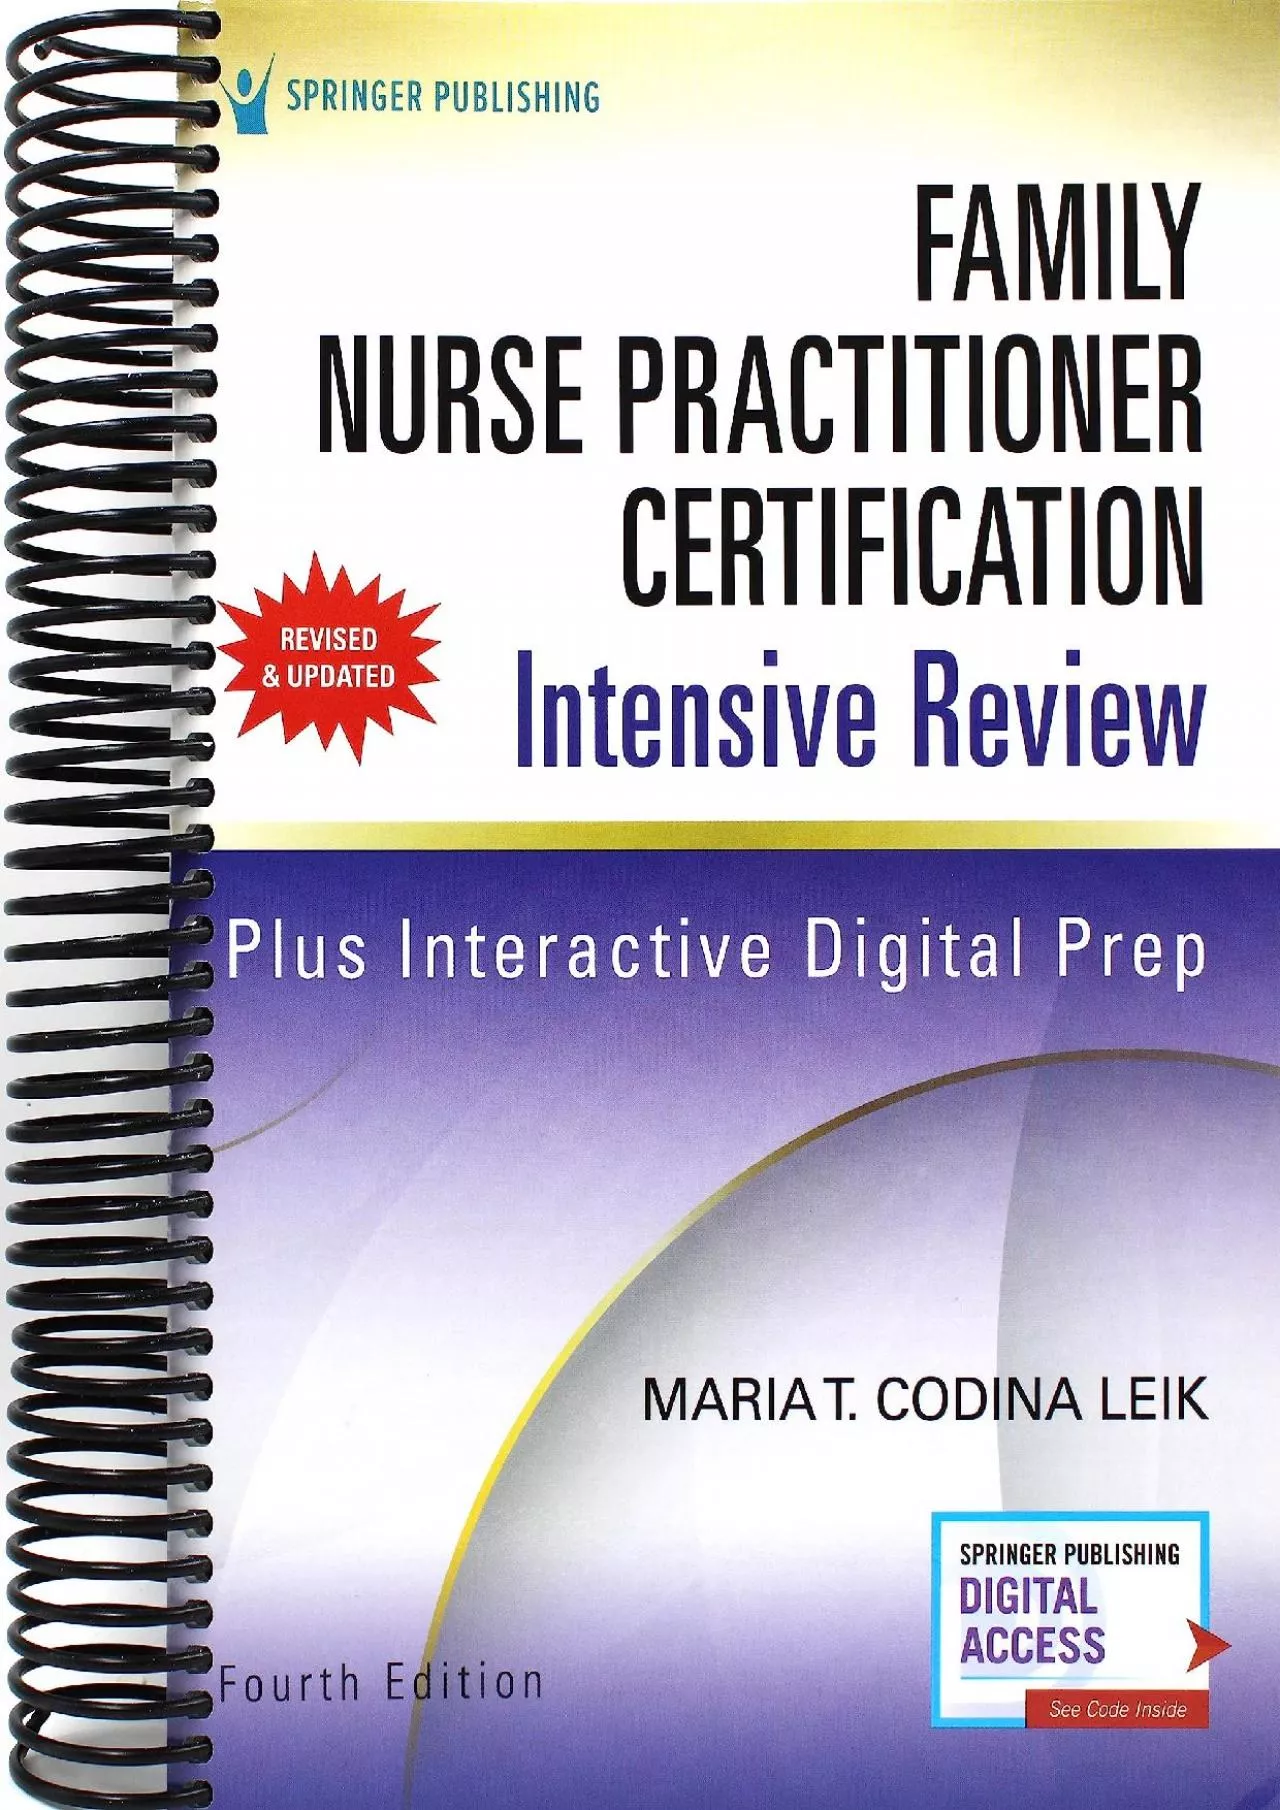 [DOWNLOAD] Family Nurse Practitioner Certification Intensive Review, Fourth Edition –